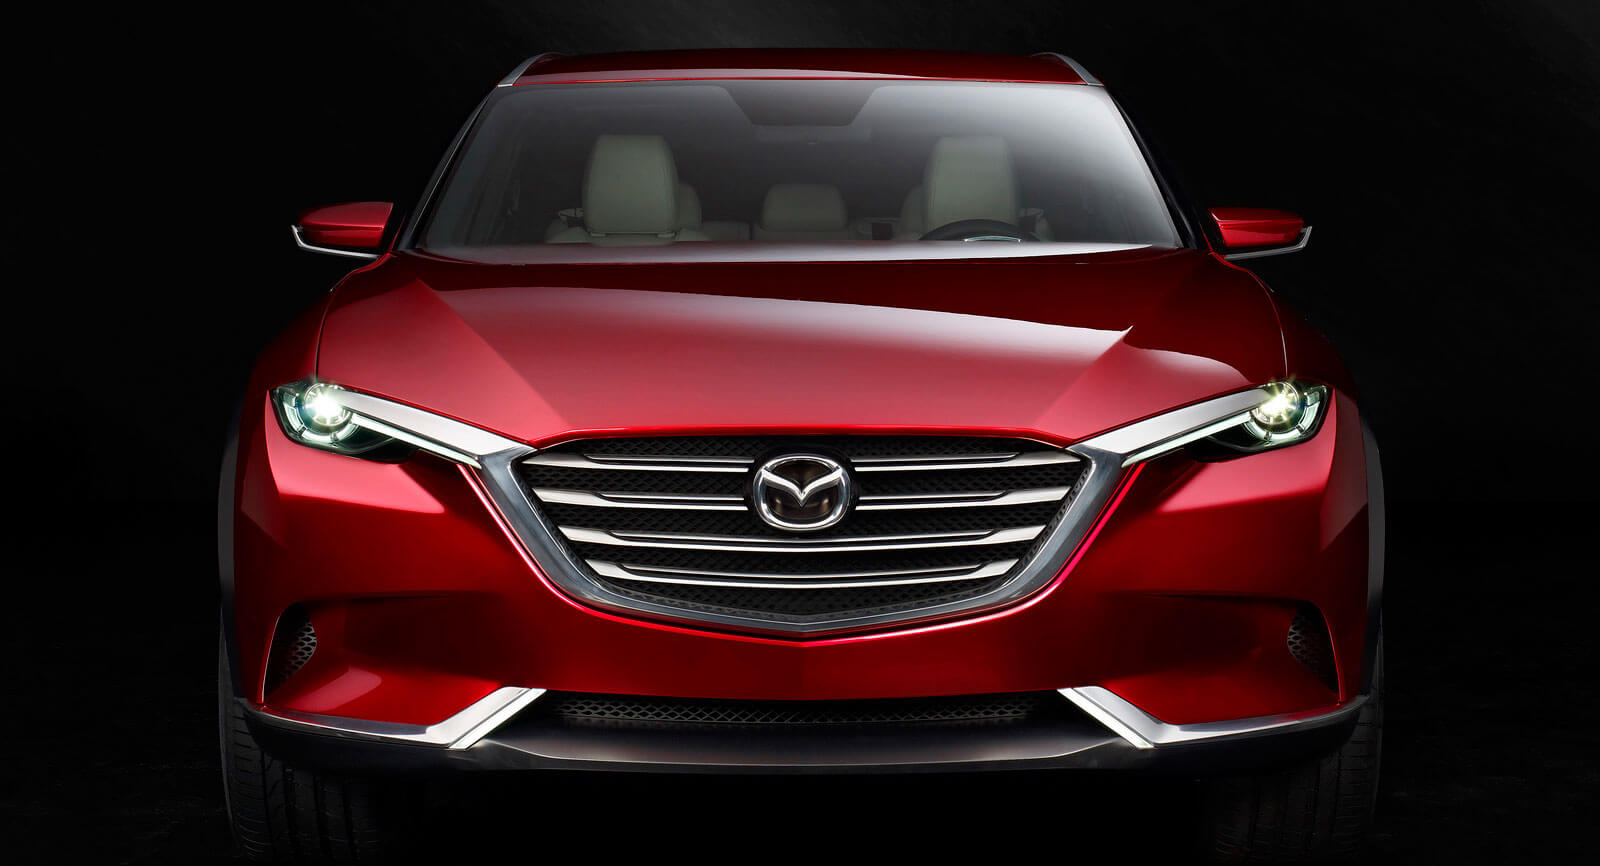 Mazda’s U.S. SUV Lineup Will Increase With The Launch Of Two New Models